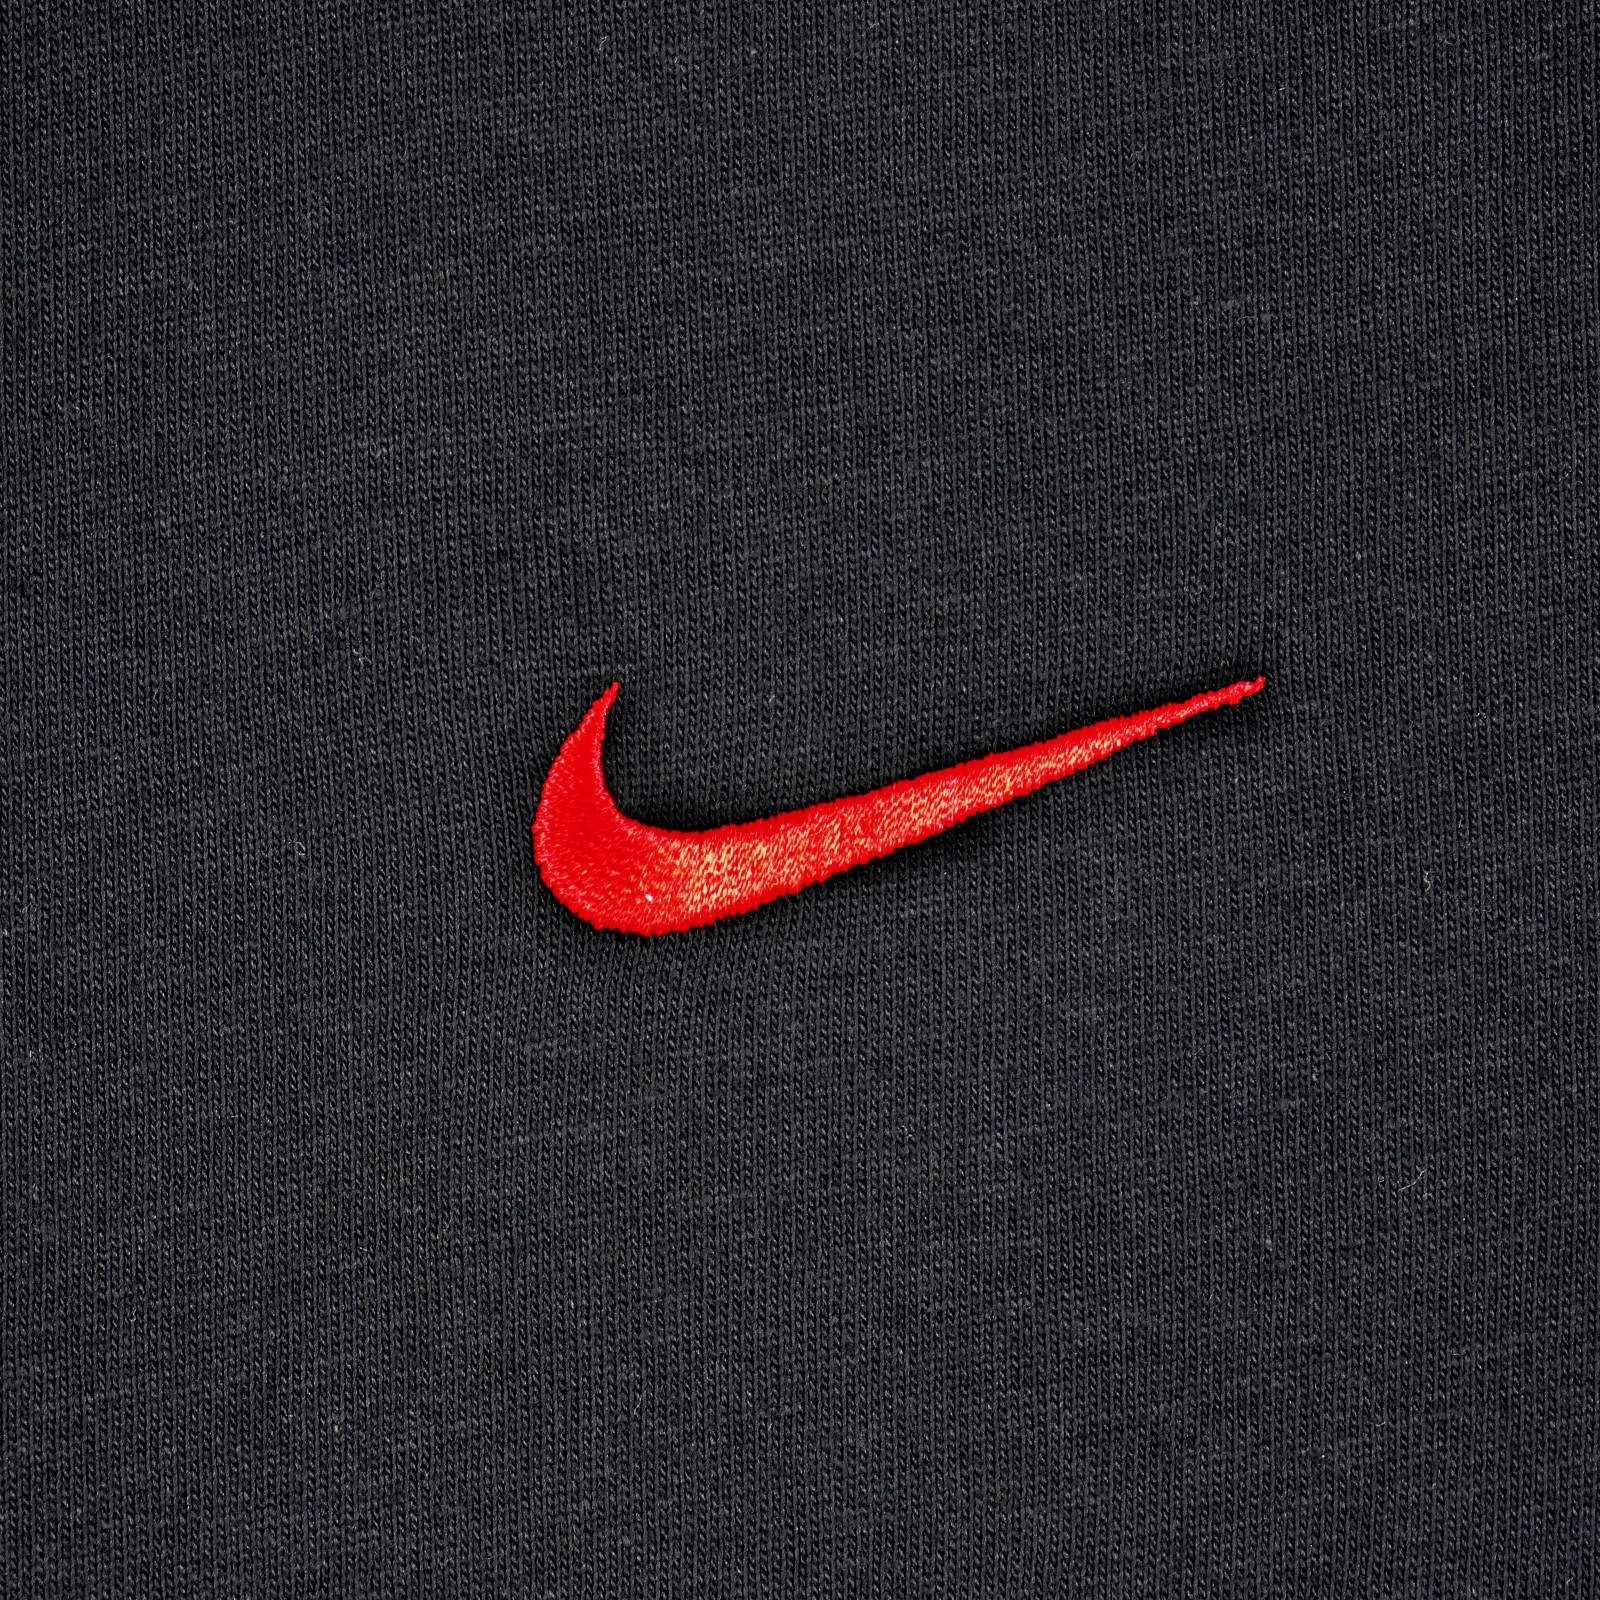 black nike top with red tick